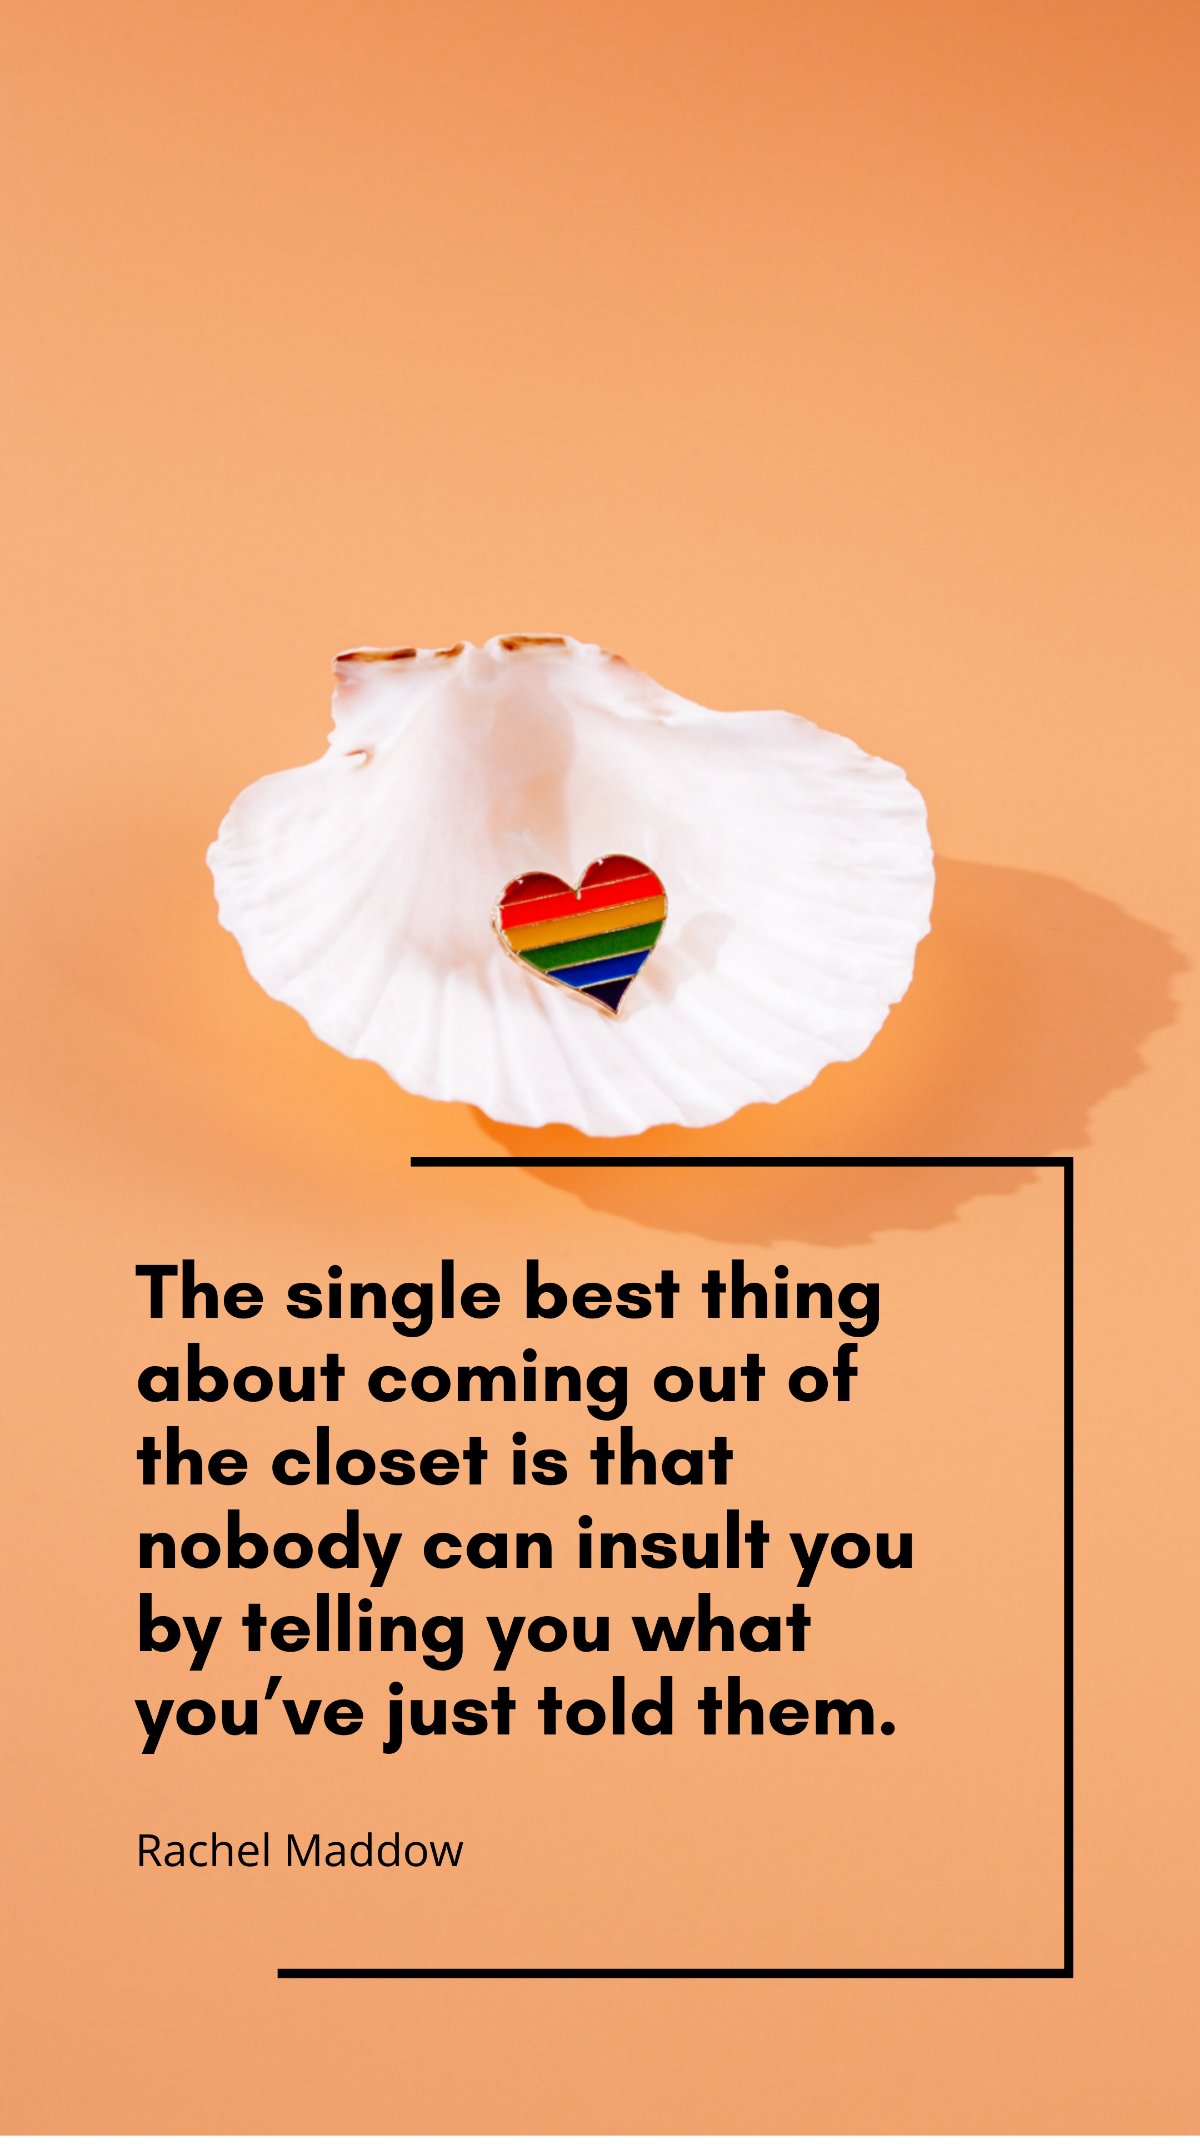 Rachel Maddow - The single best thing about coming out of the closet is that nobody can insult you by telling you what you’ve just told them. Template